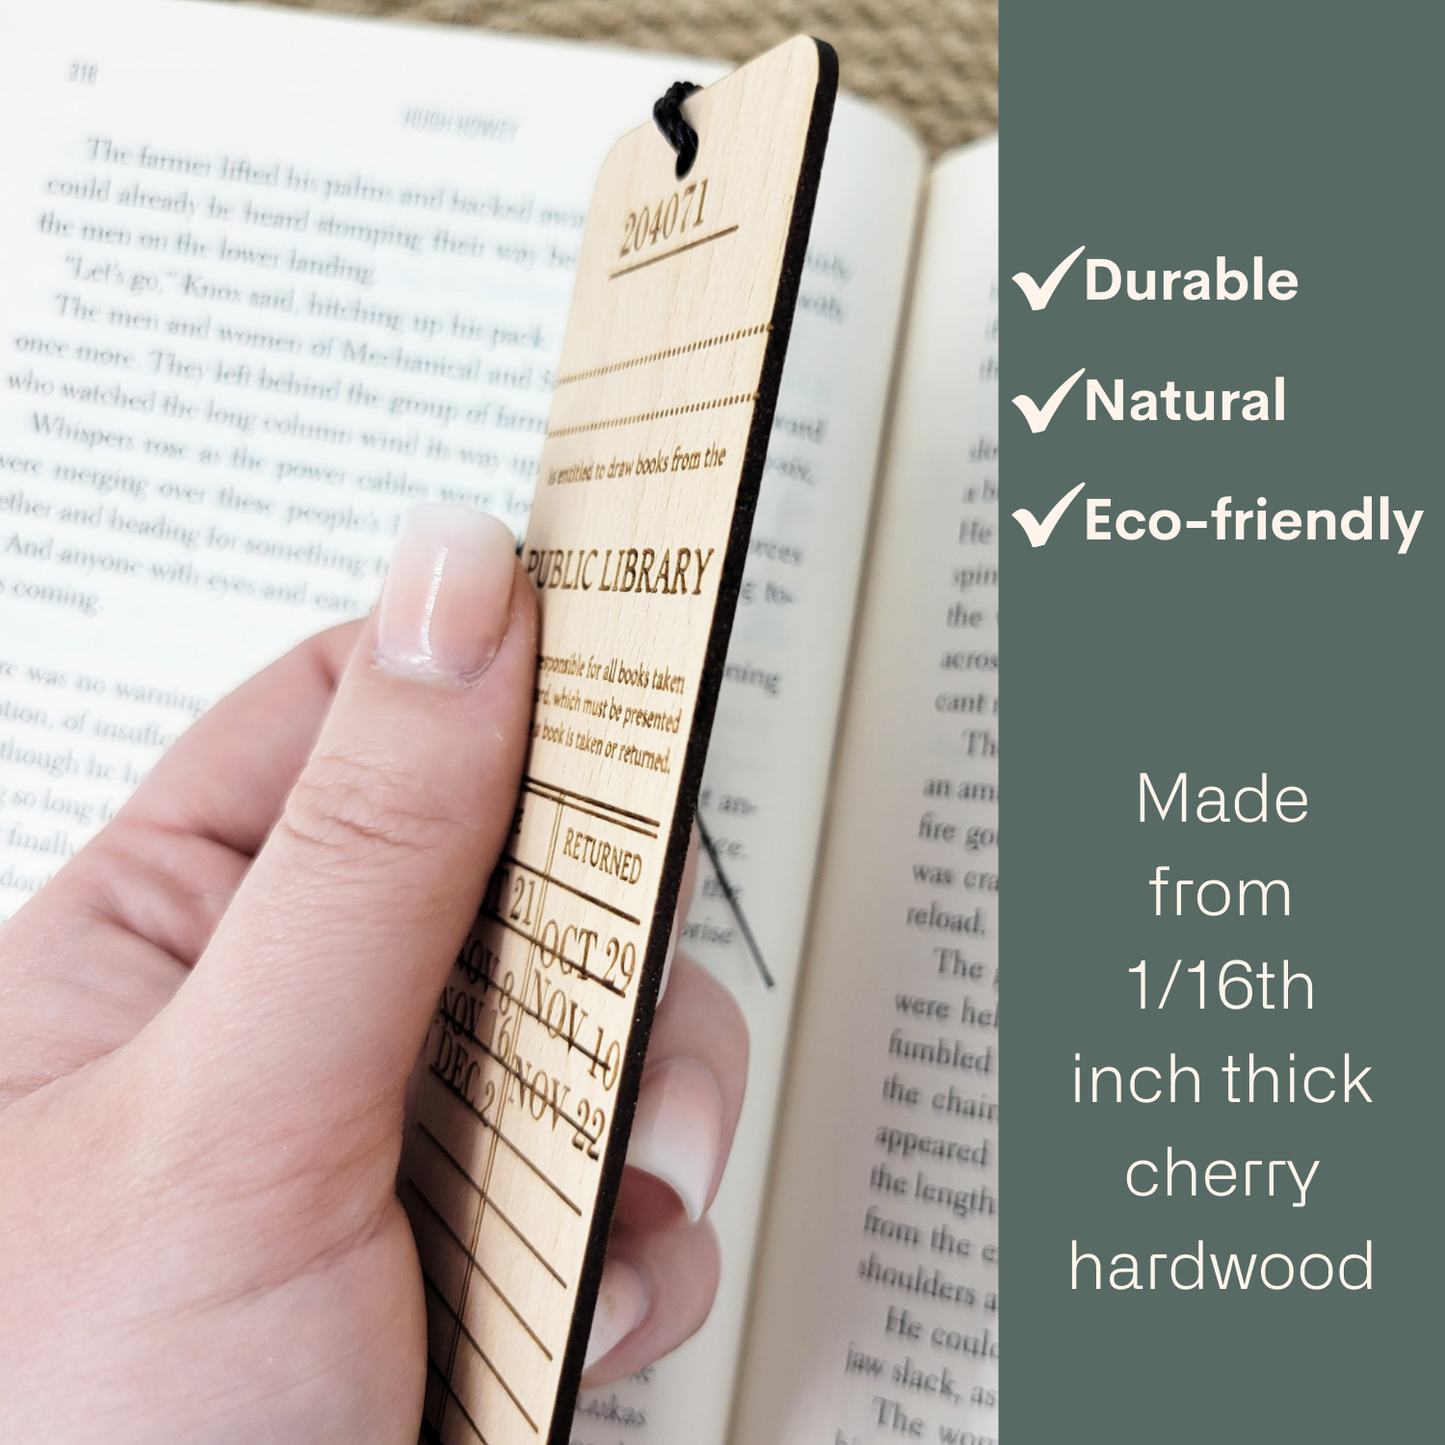 Bumble and Birch - To Bee Continued wood bookmark  - eco-friendly